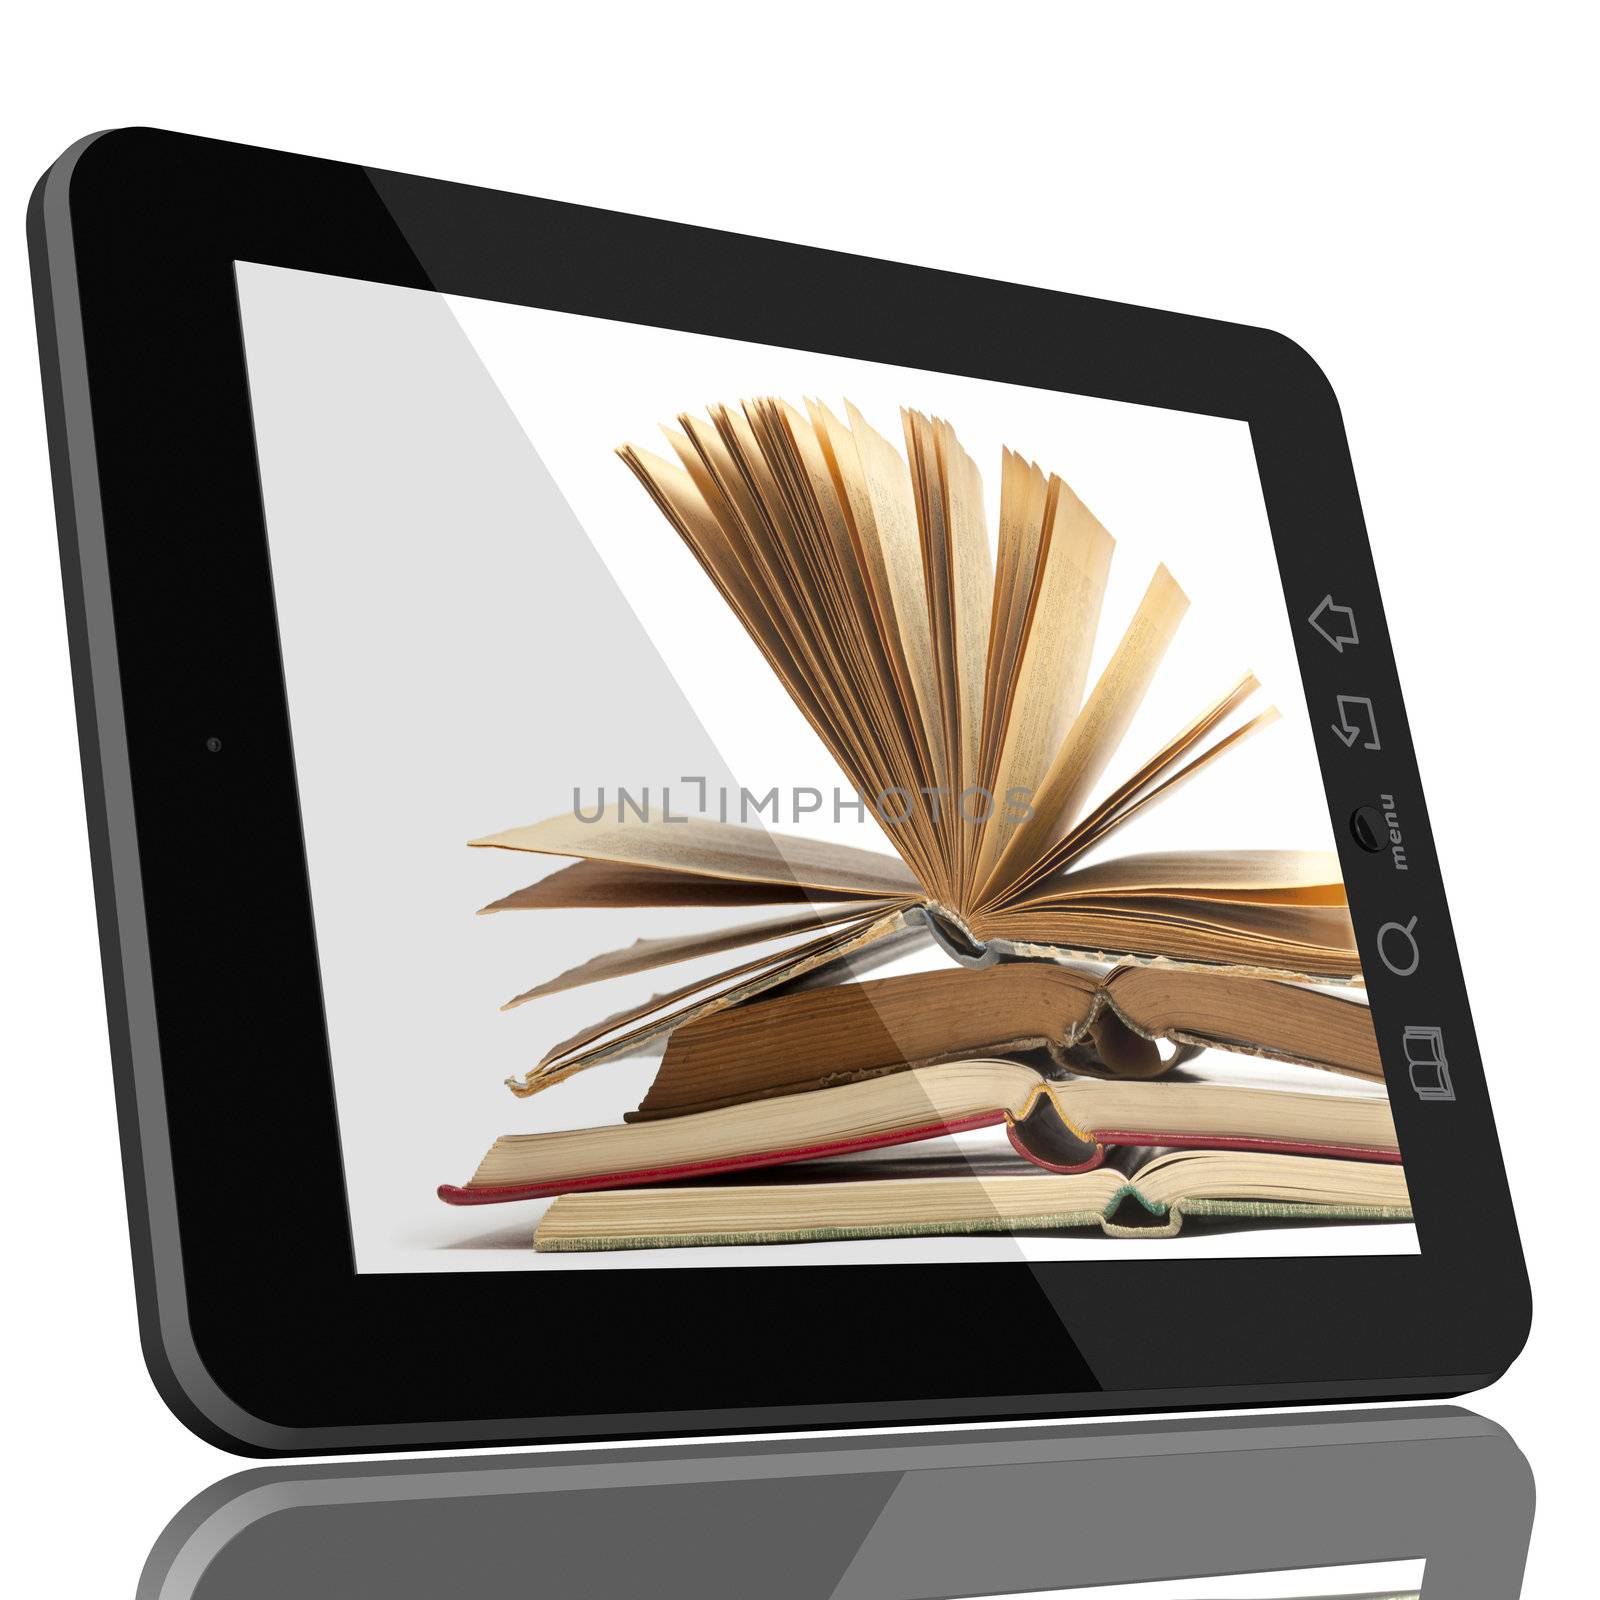 Tablet PC Computer and book - Digital Library Concept by adamr